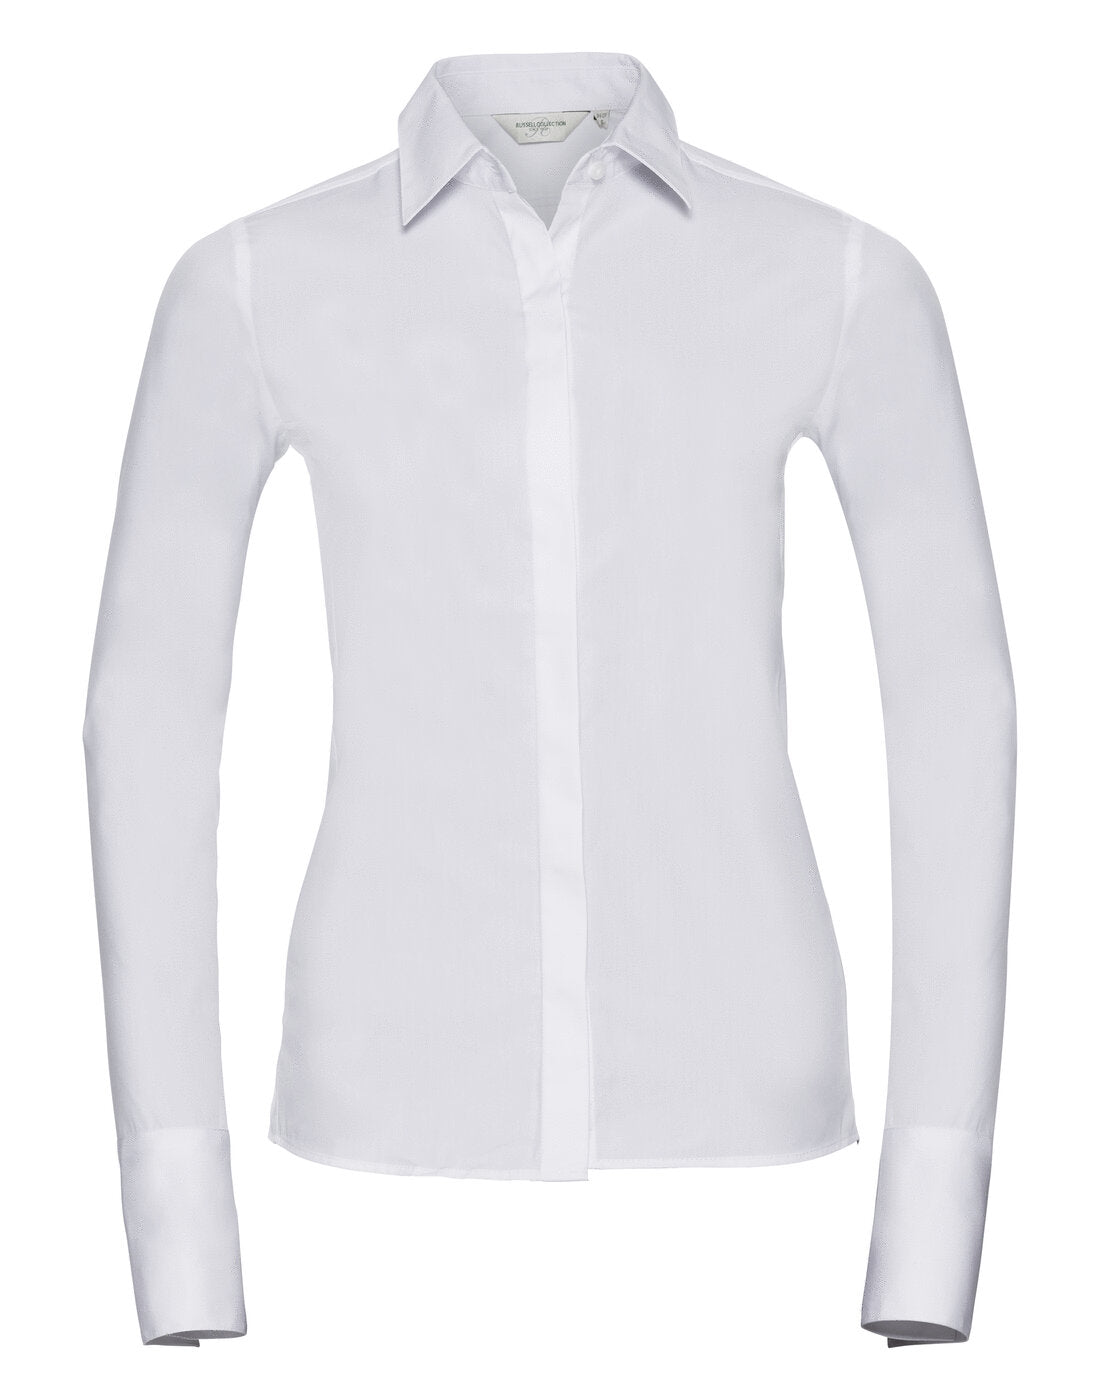 Russell Ladies Long Sleeve Ultimate Stretch Shirt White